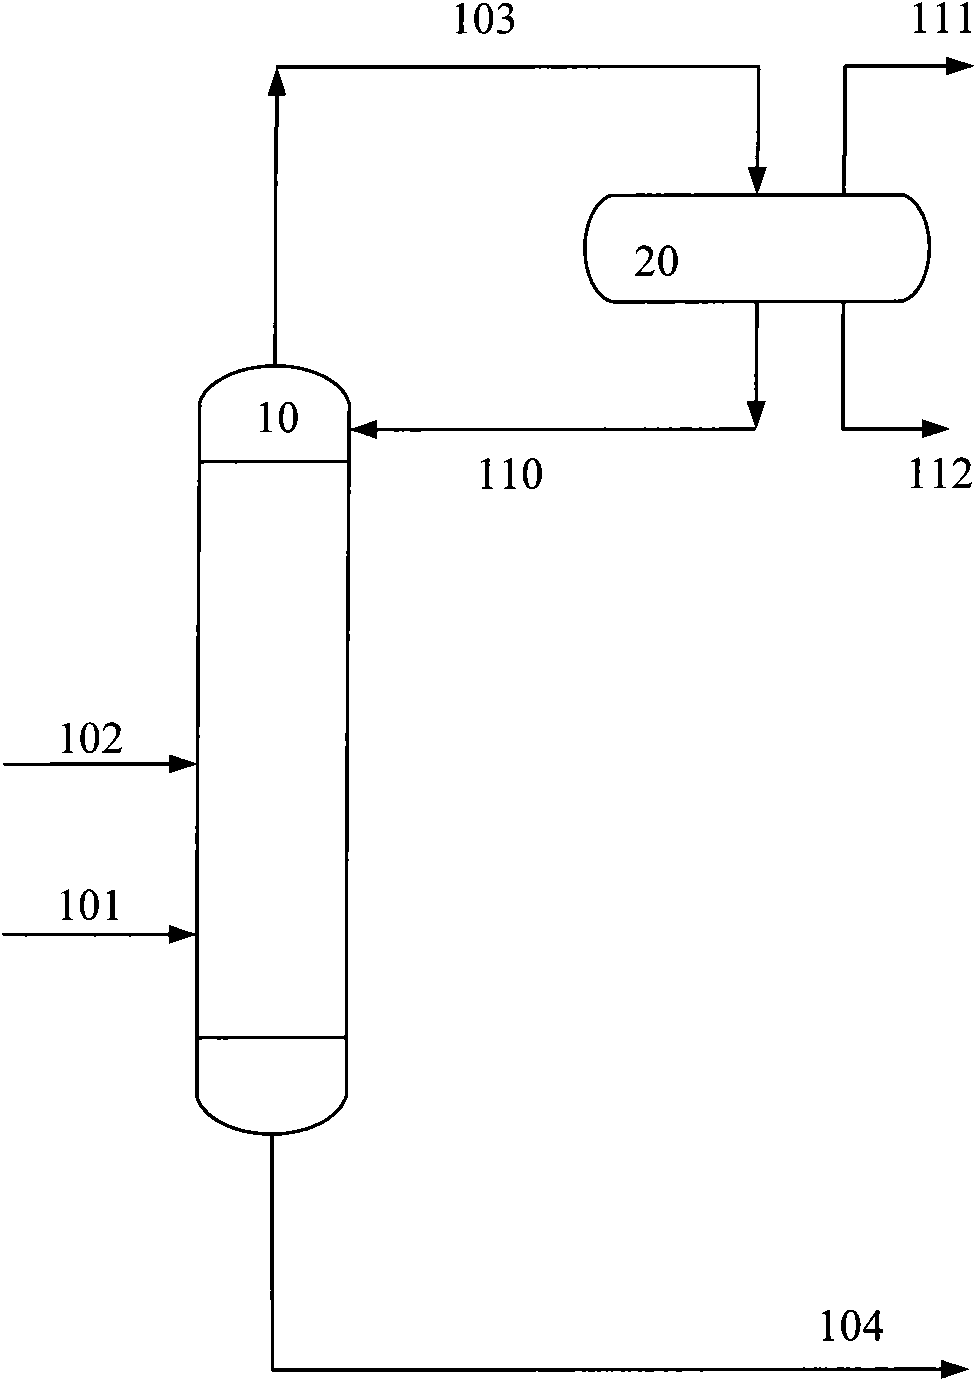 C4 hydrocarbon catalysis and separation method capable of separating isobutene and butene-2